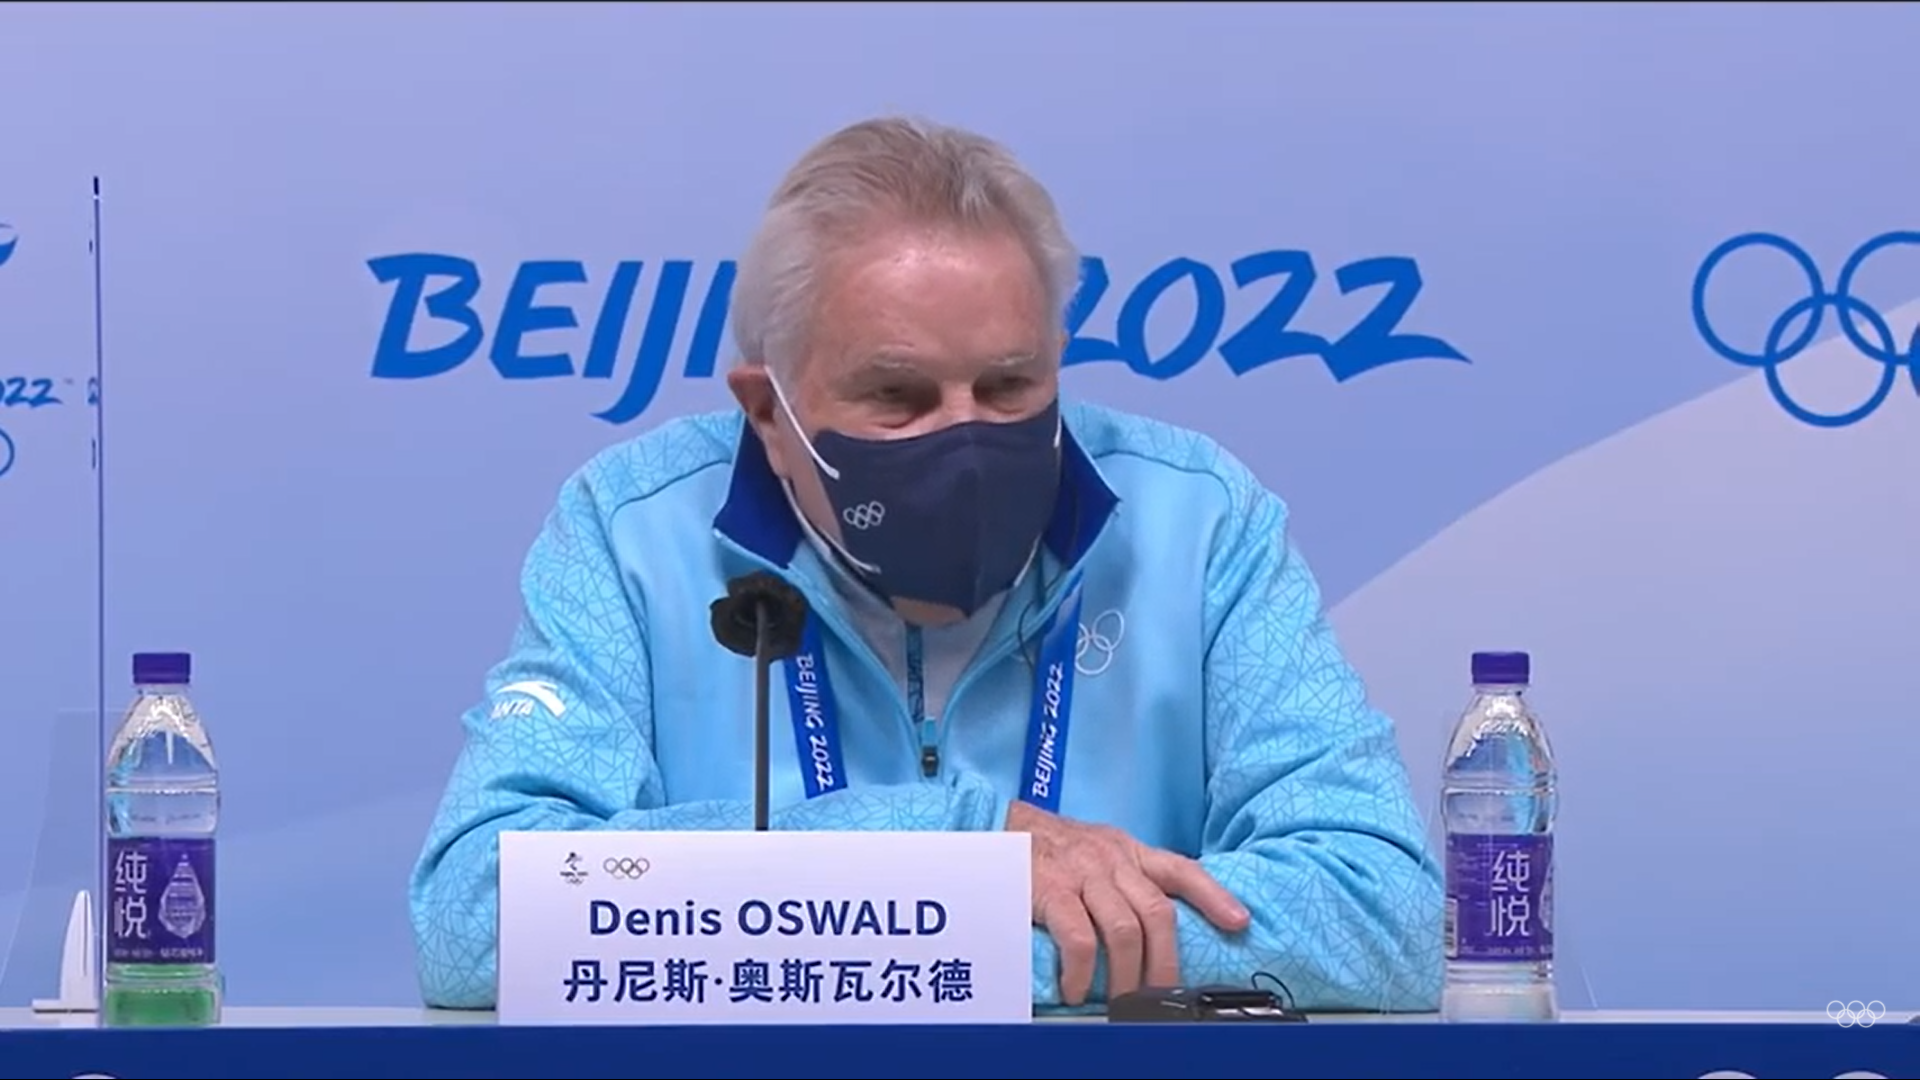 IOC Executive Board member Denis Oswald has defended the organisation's handling of the Russian doping scandal which is in the public again after the case of skater Kamila Valieva ©IOC